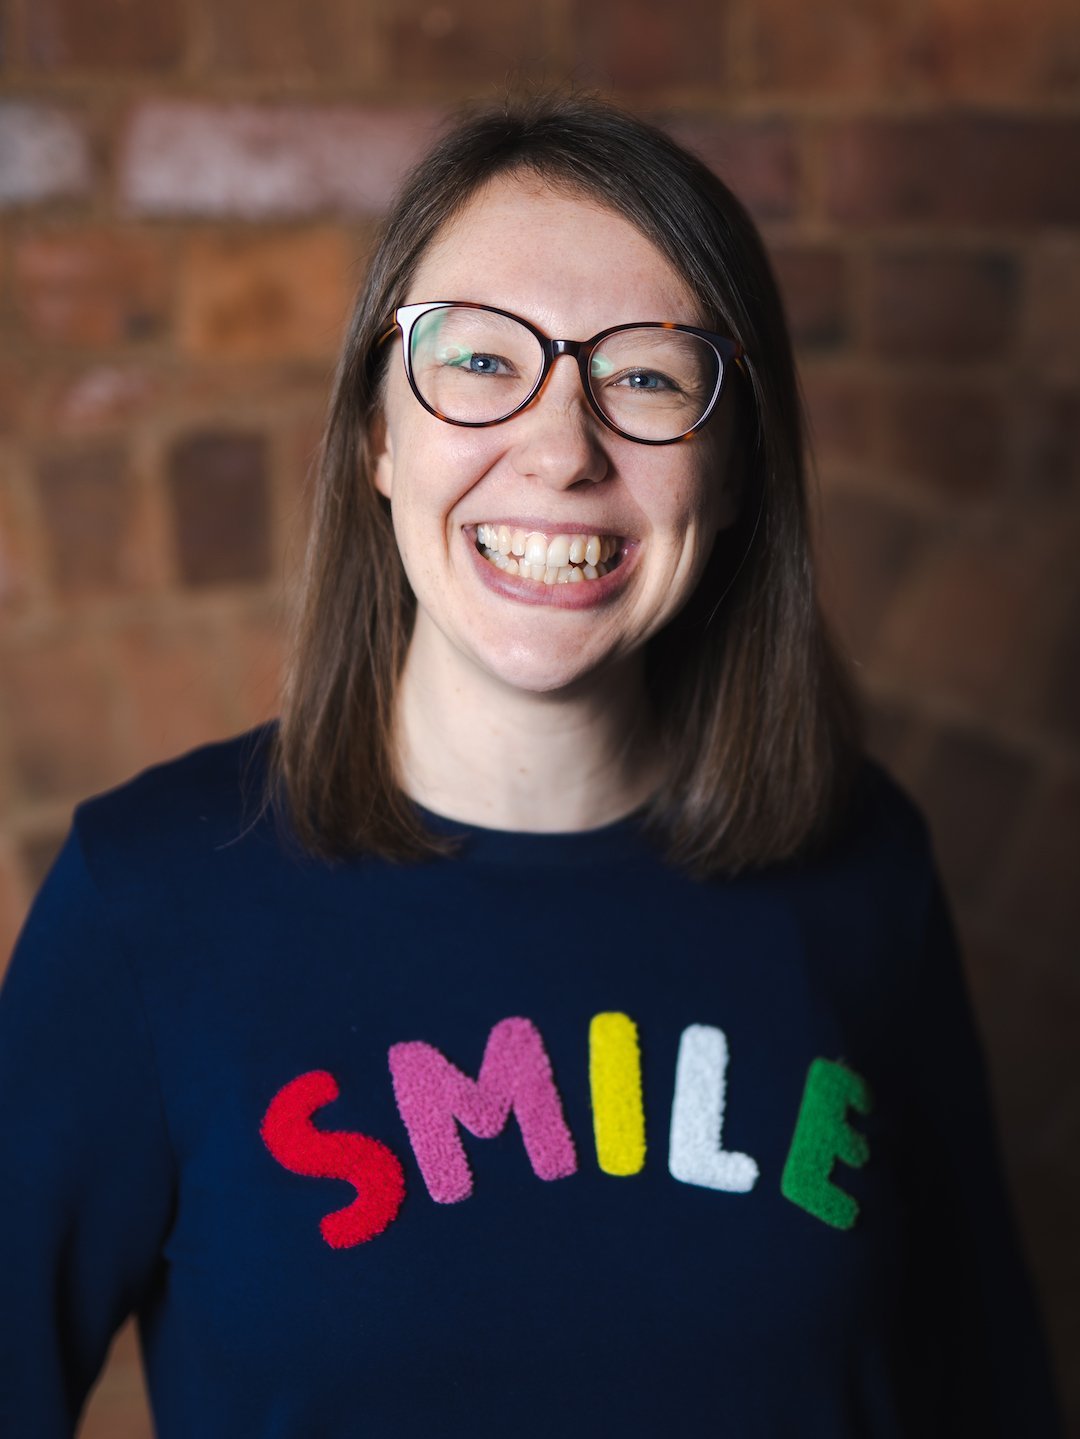 A white female with shoulder length brown hair and glasses is smiling. She is wearing a navy blue jumper with 'SMILE' written on the chest in different colours.